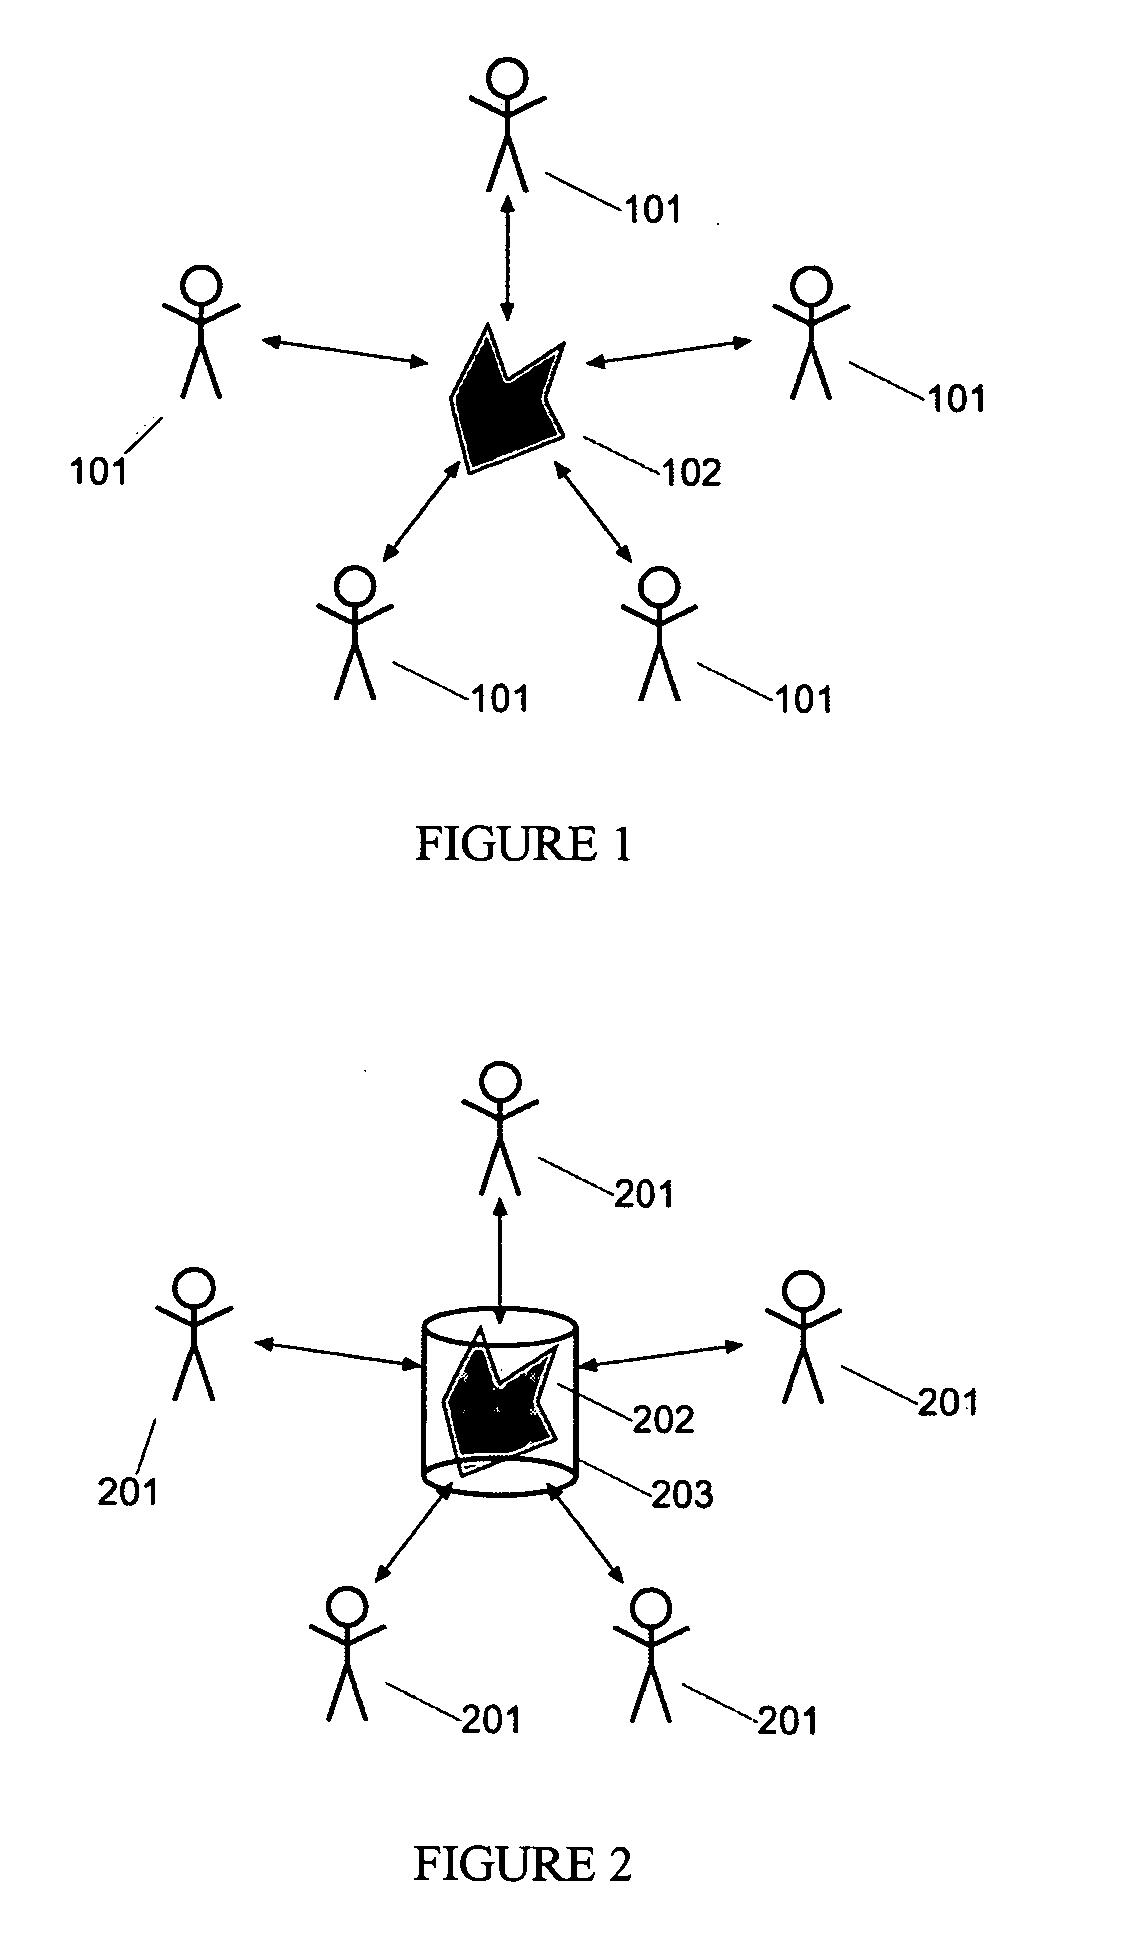 System and method for replicating, integrating and synchronizing distributed information